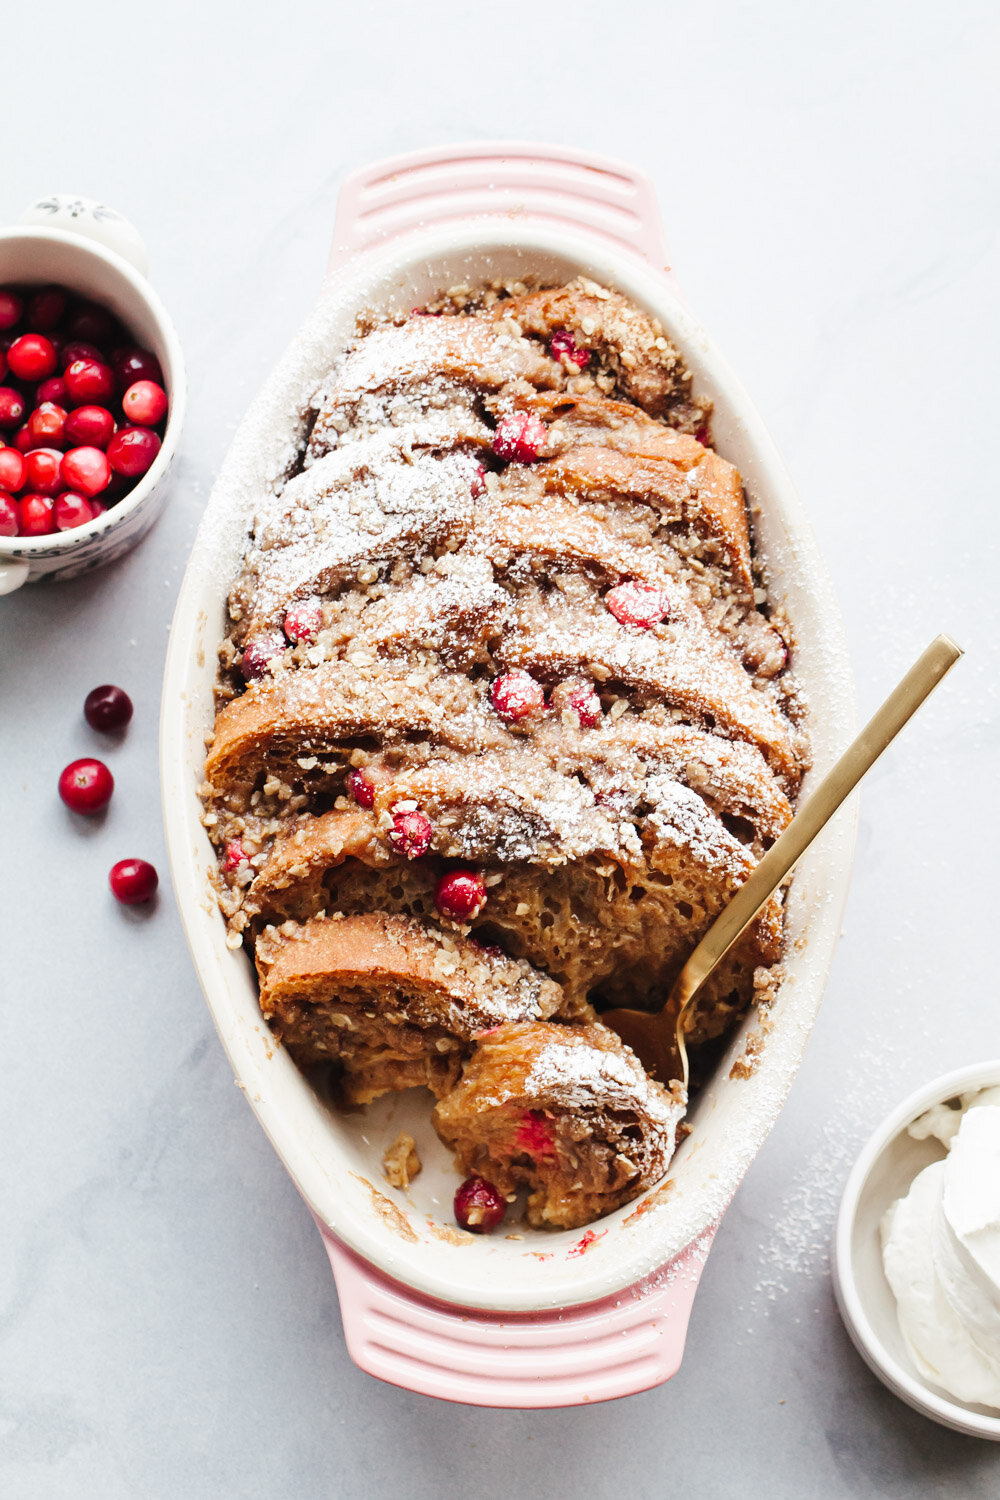 Overnight Gingerbread French Toast Recipe with cranberries, streusel, and whipped cream